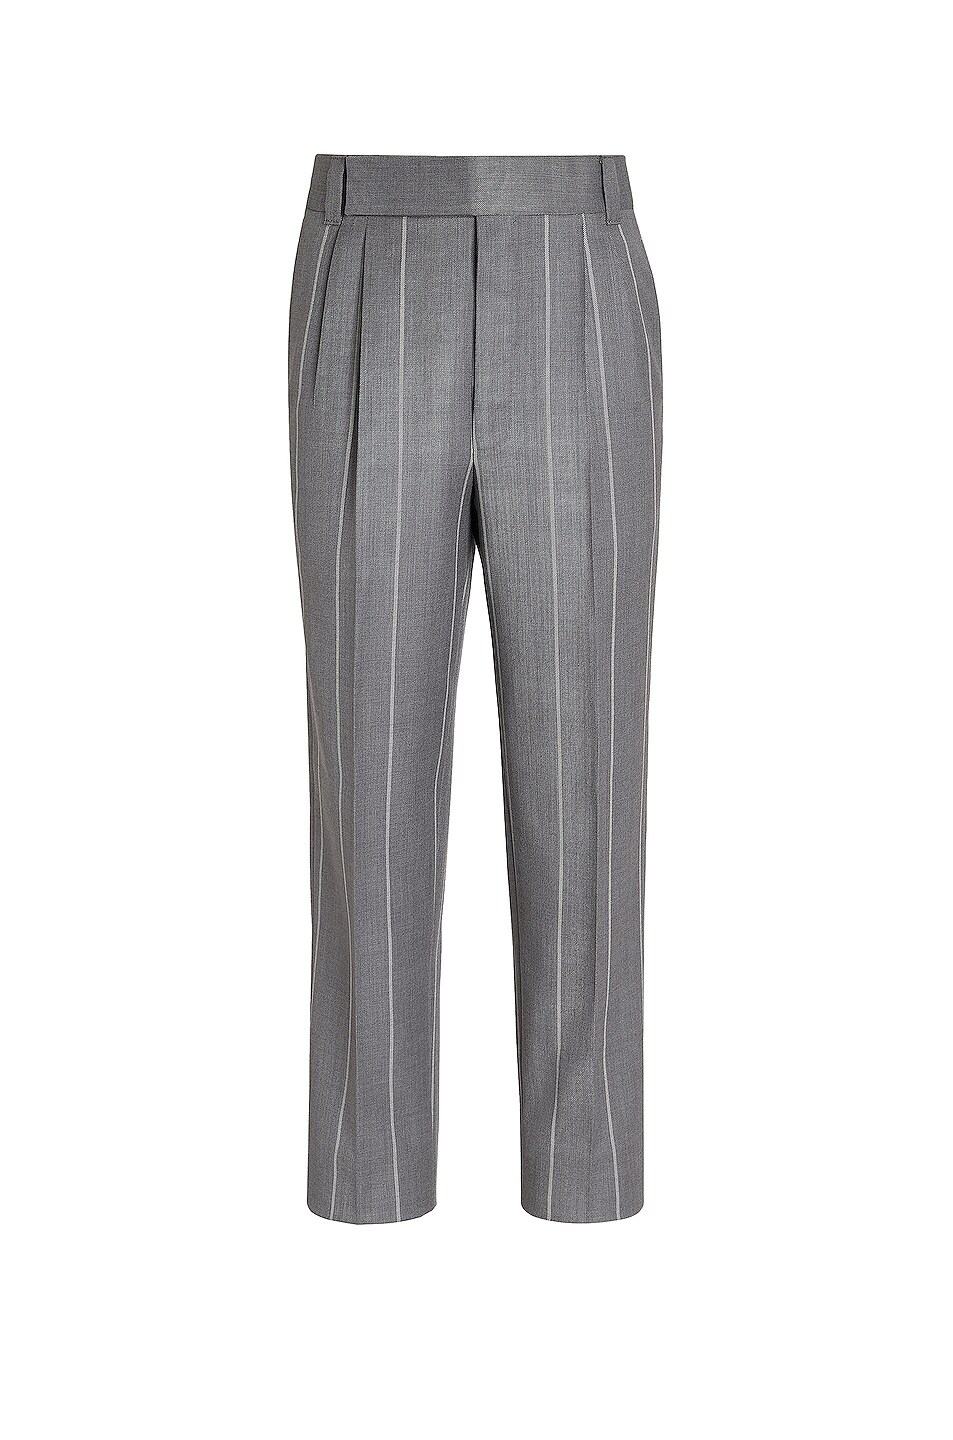 Image 1 of Fear of God Exclusively for Ermenegildo Zegna Double Pleat Trousers in Grey Melange White